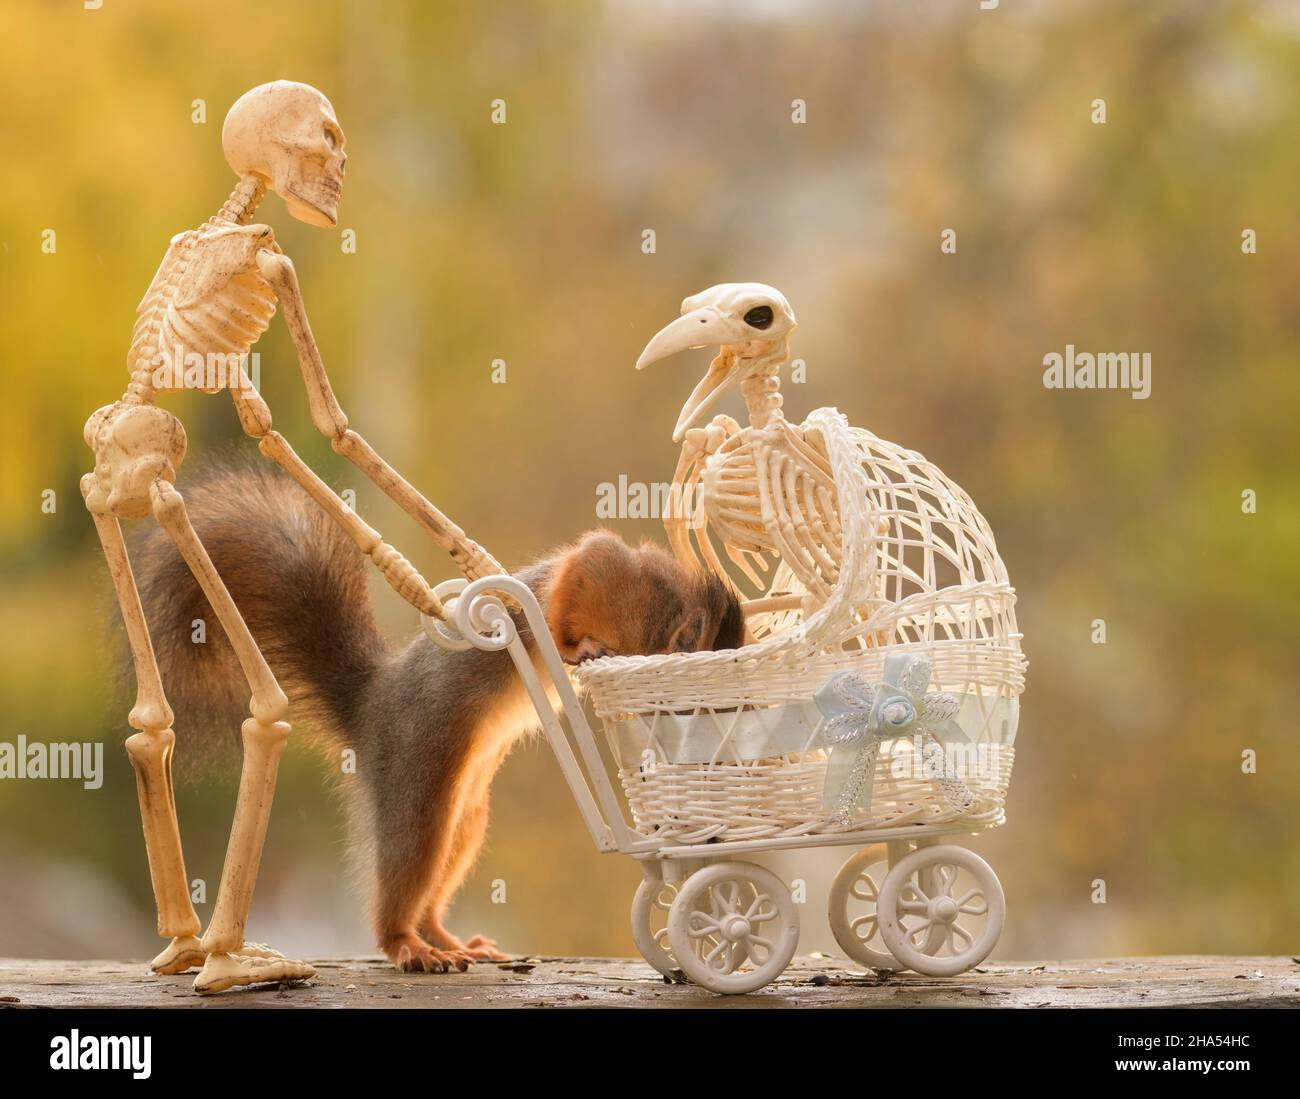 red squirrel is standing behind an stroller with a skeleton bird Stock Photo